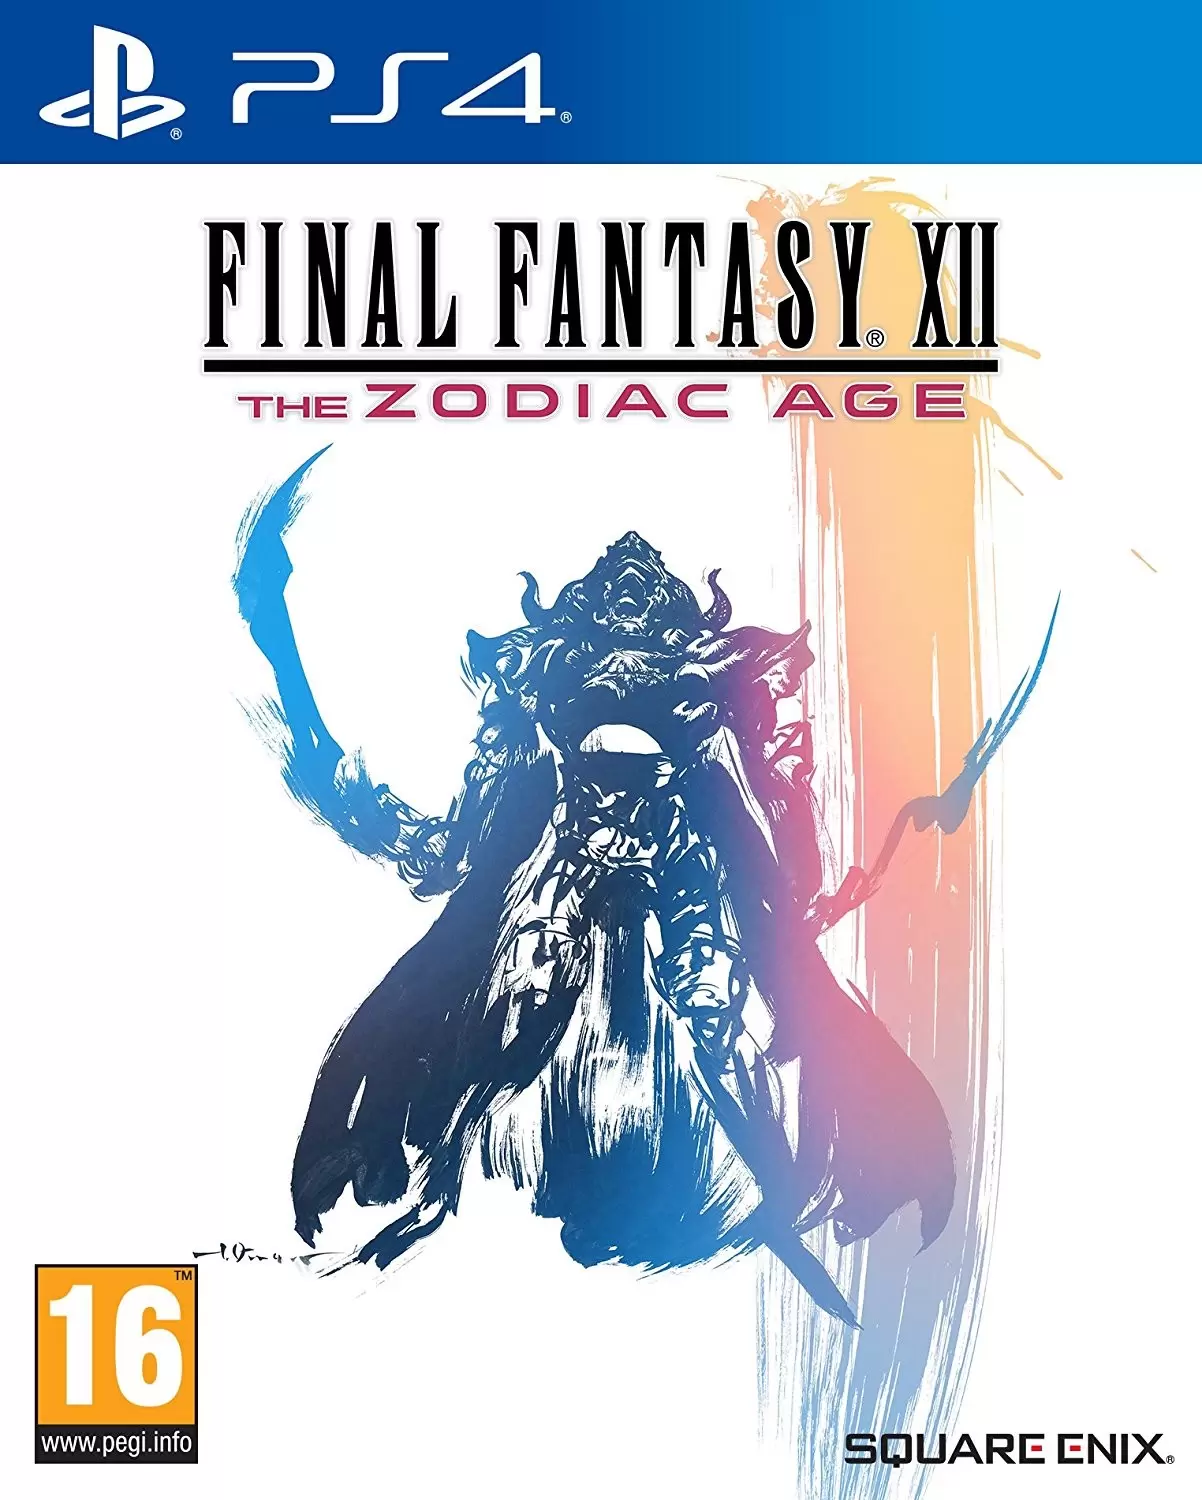 PS4 Games - Final Fantasy XII The Zodiac Age